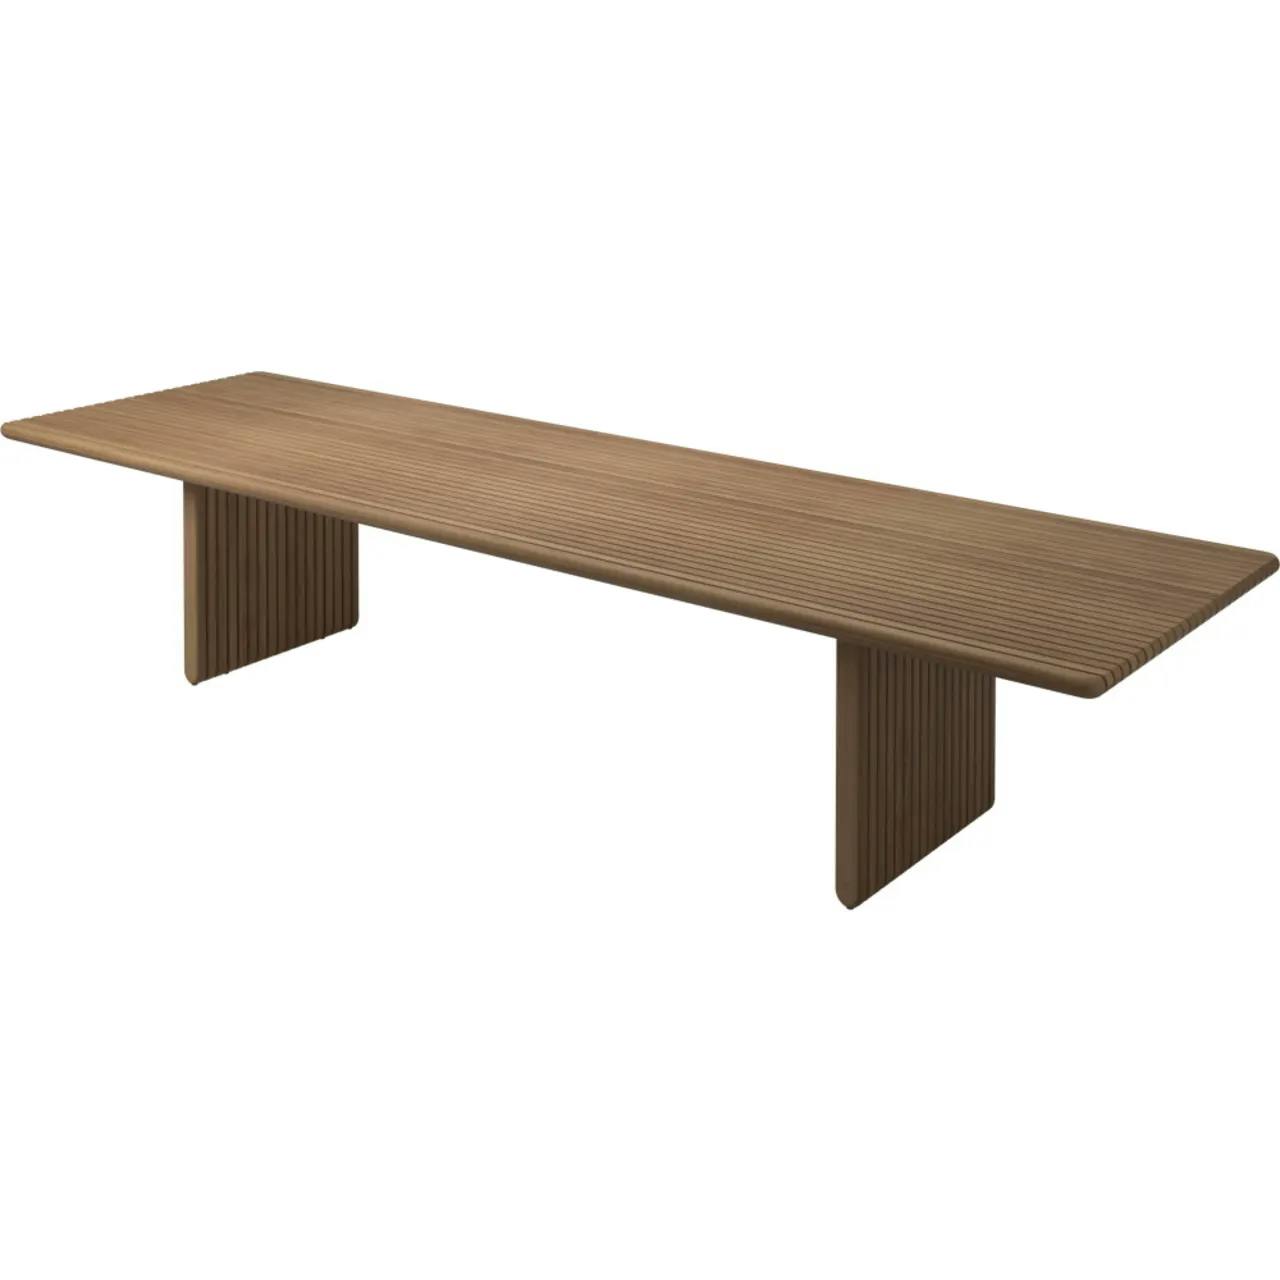 Gloster Deck Dining Table Teak